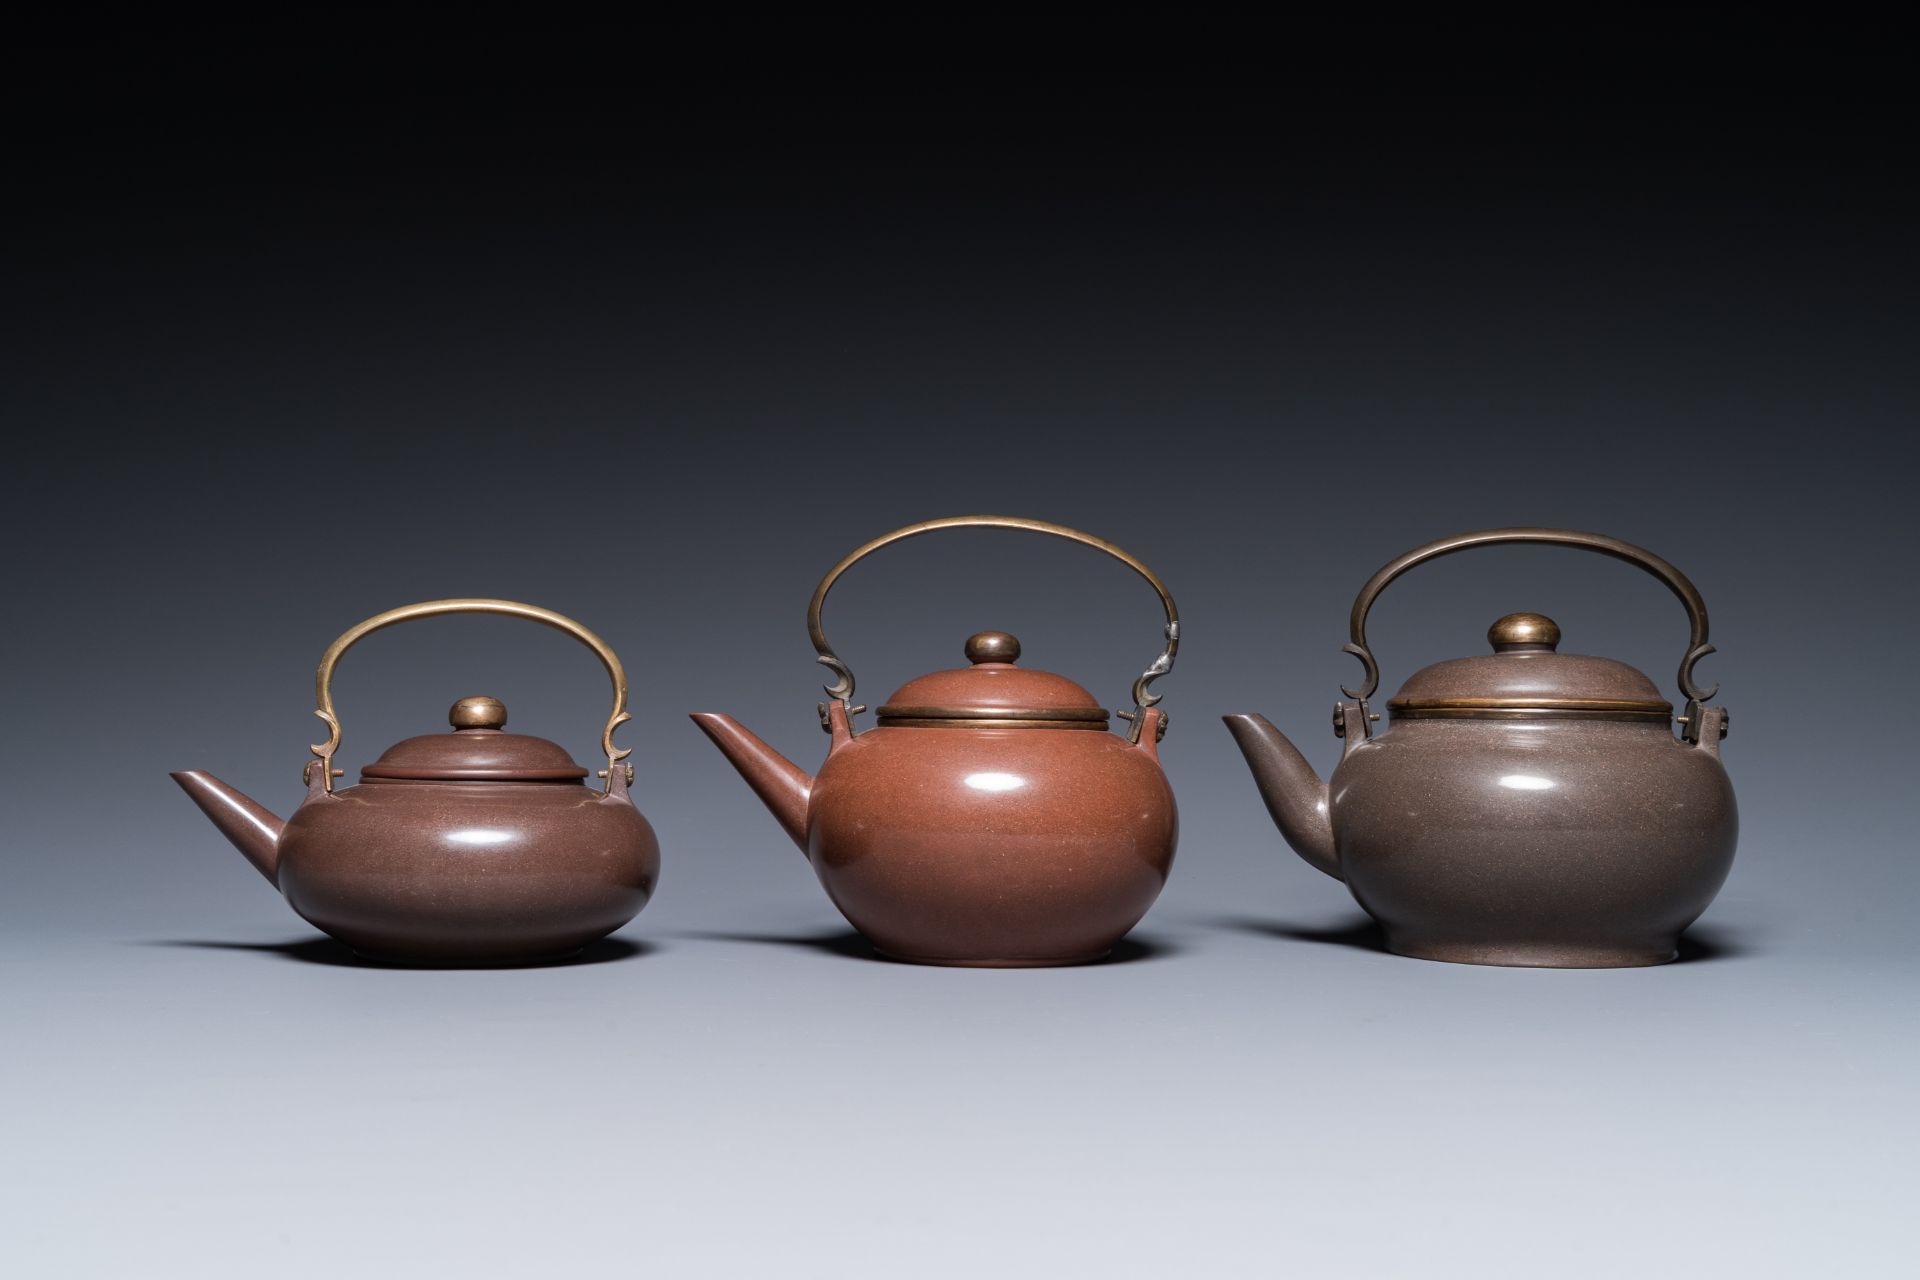 Three Chinese polished Yixing stoneware teapots and covers for the Thai market, Gong Ju è´¡å±€ mark, - Image 2 of 9